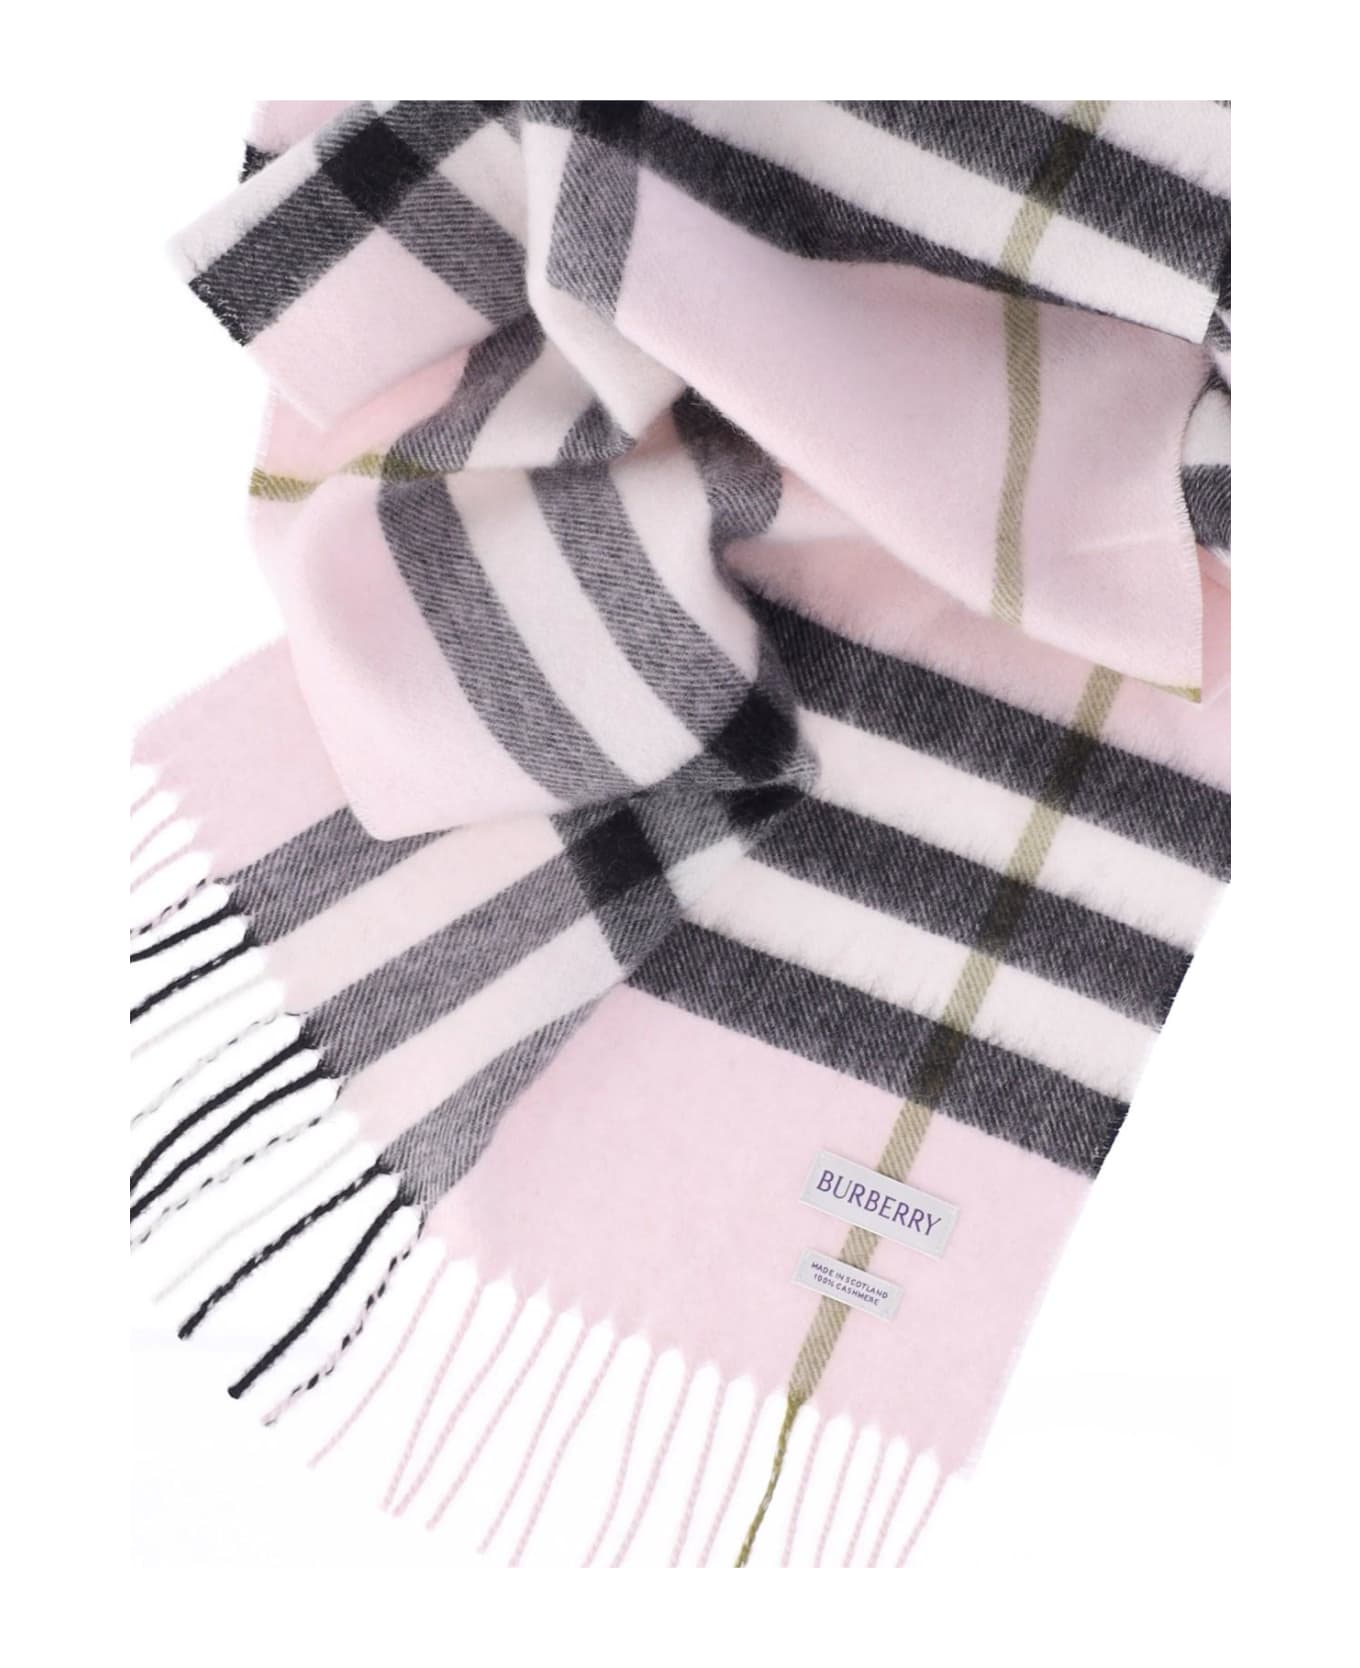 Burberry 'check' Scarf - Pale Candy Pink スカーフ＆ストール